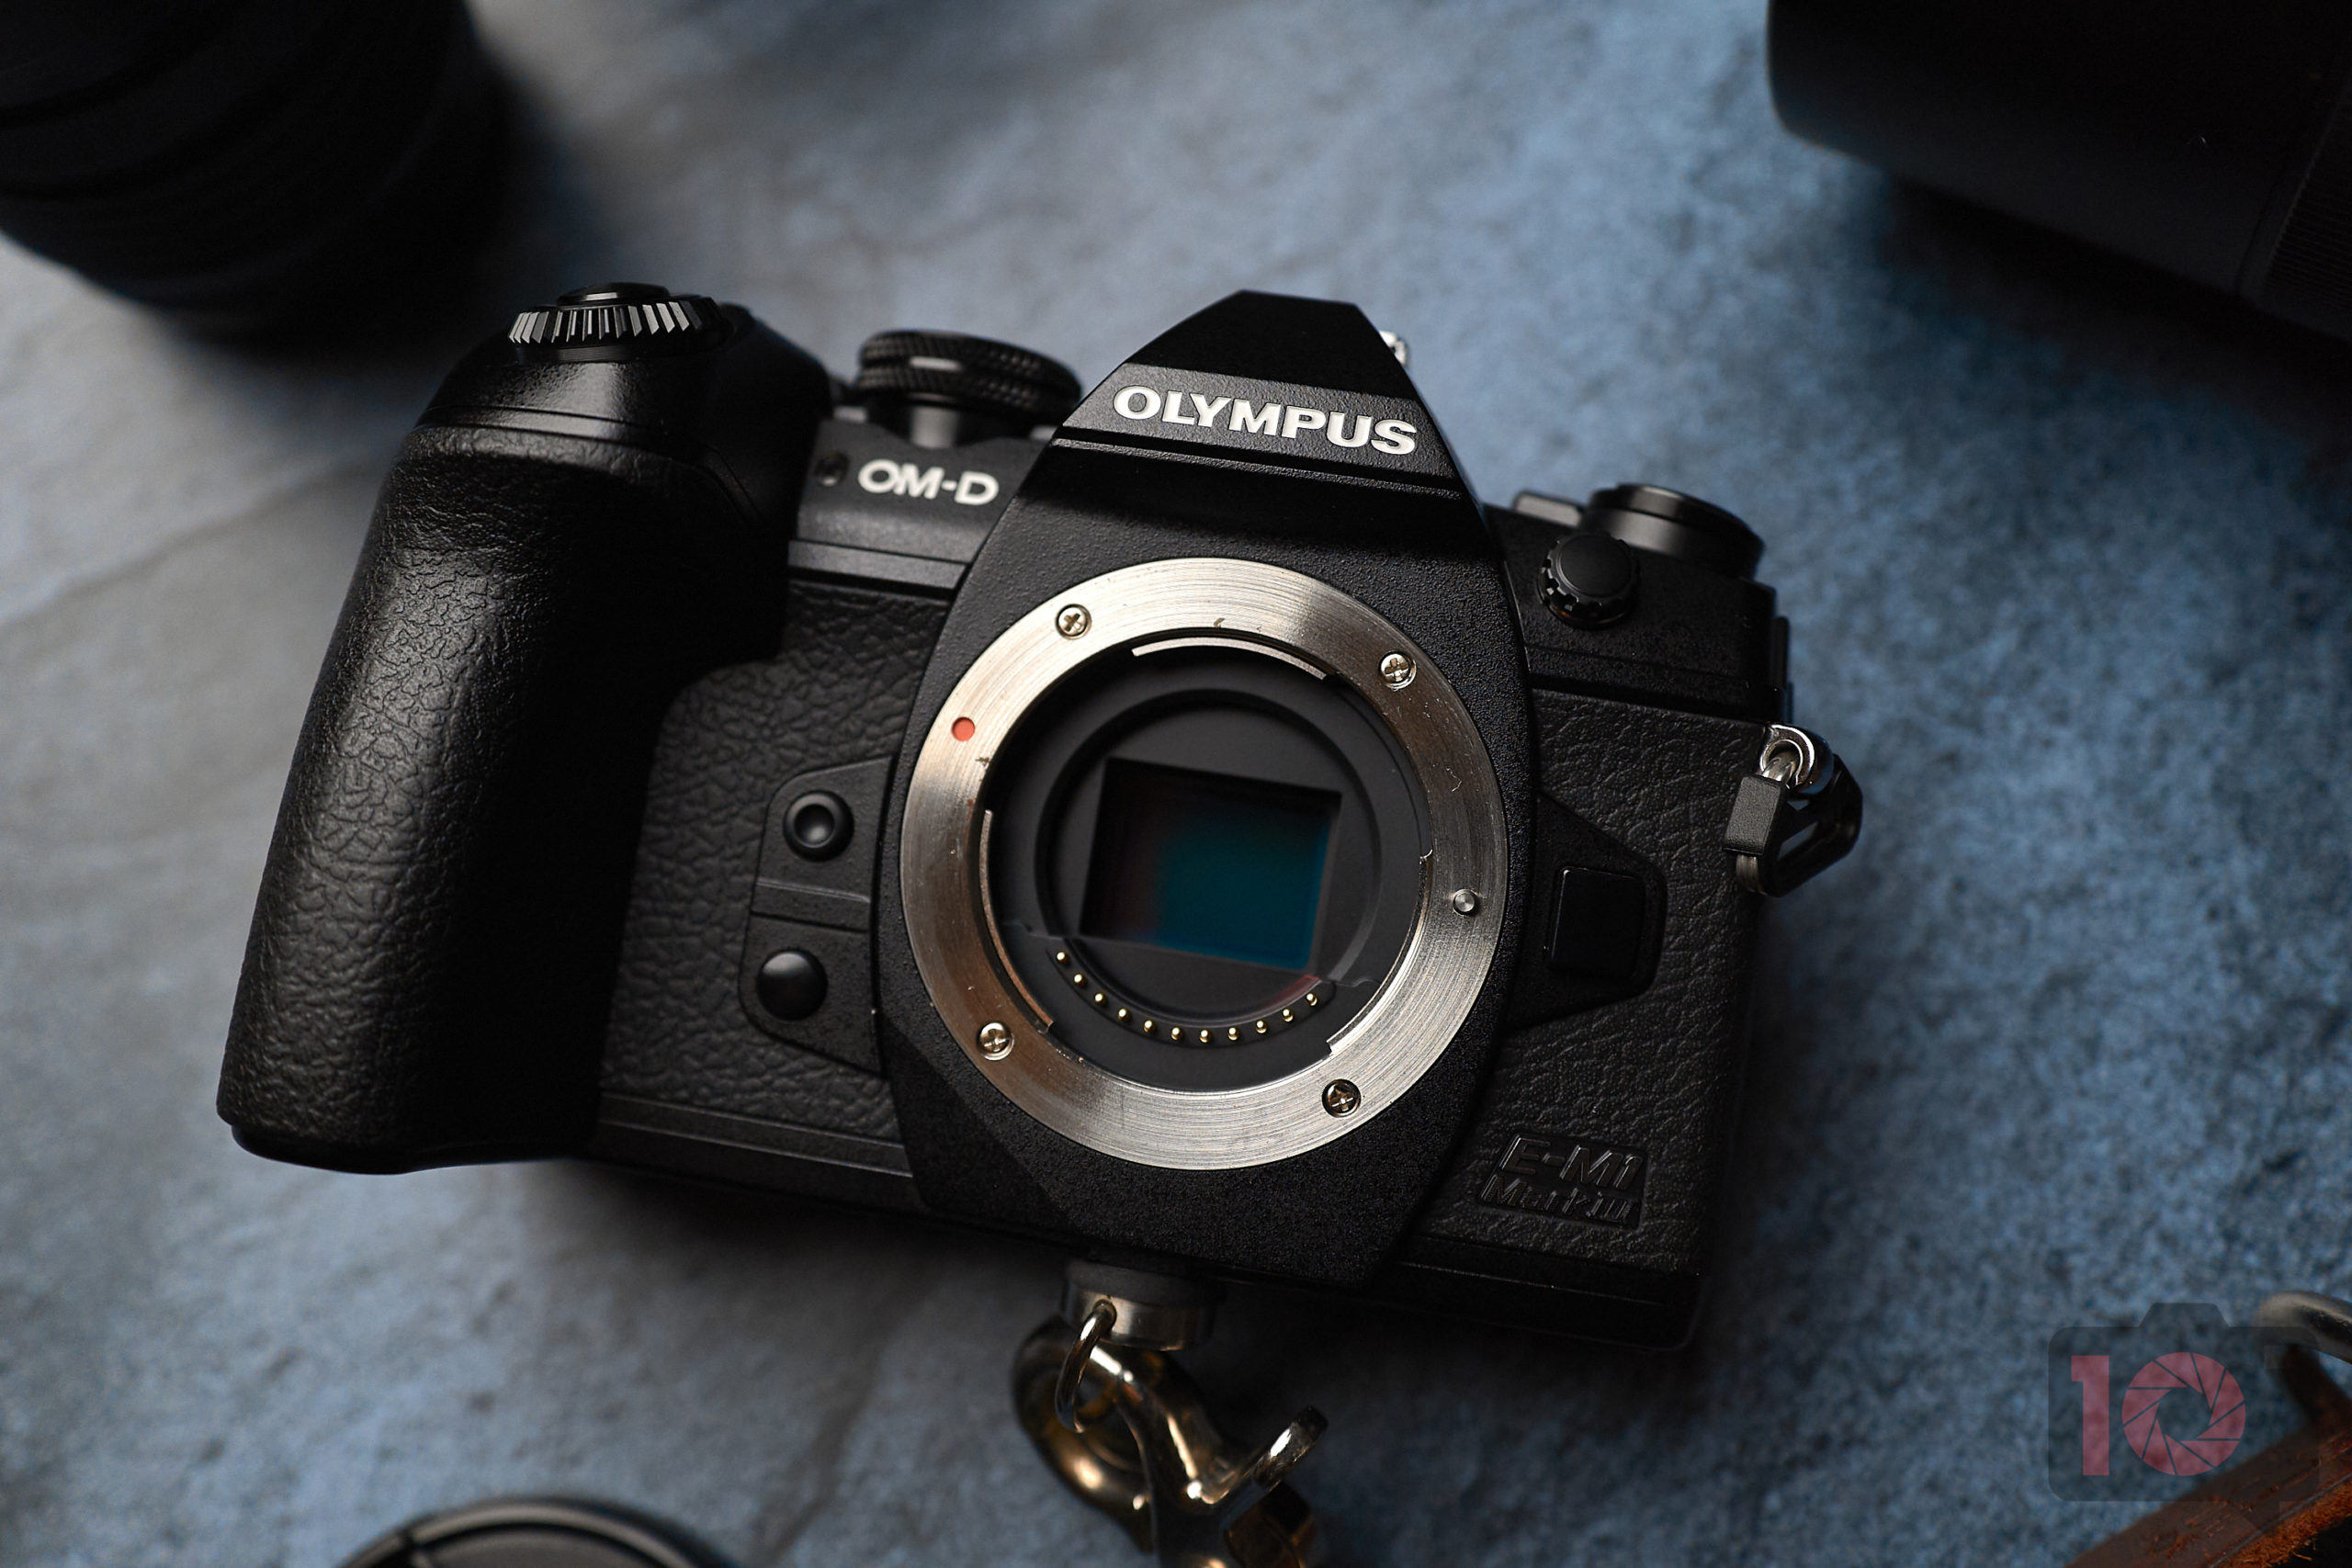 Snag a Free Olympus Camera When You Purchase This Lens Bundle